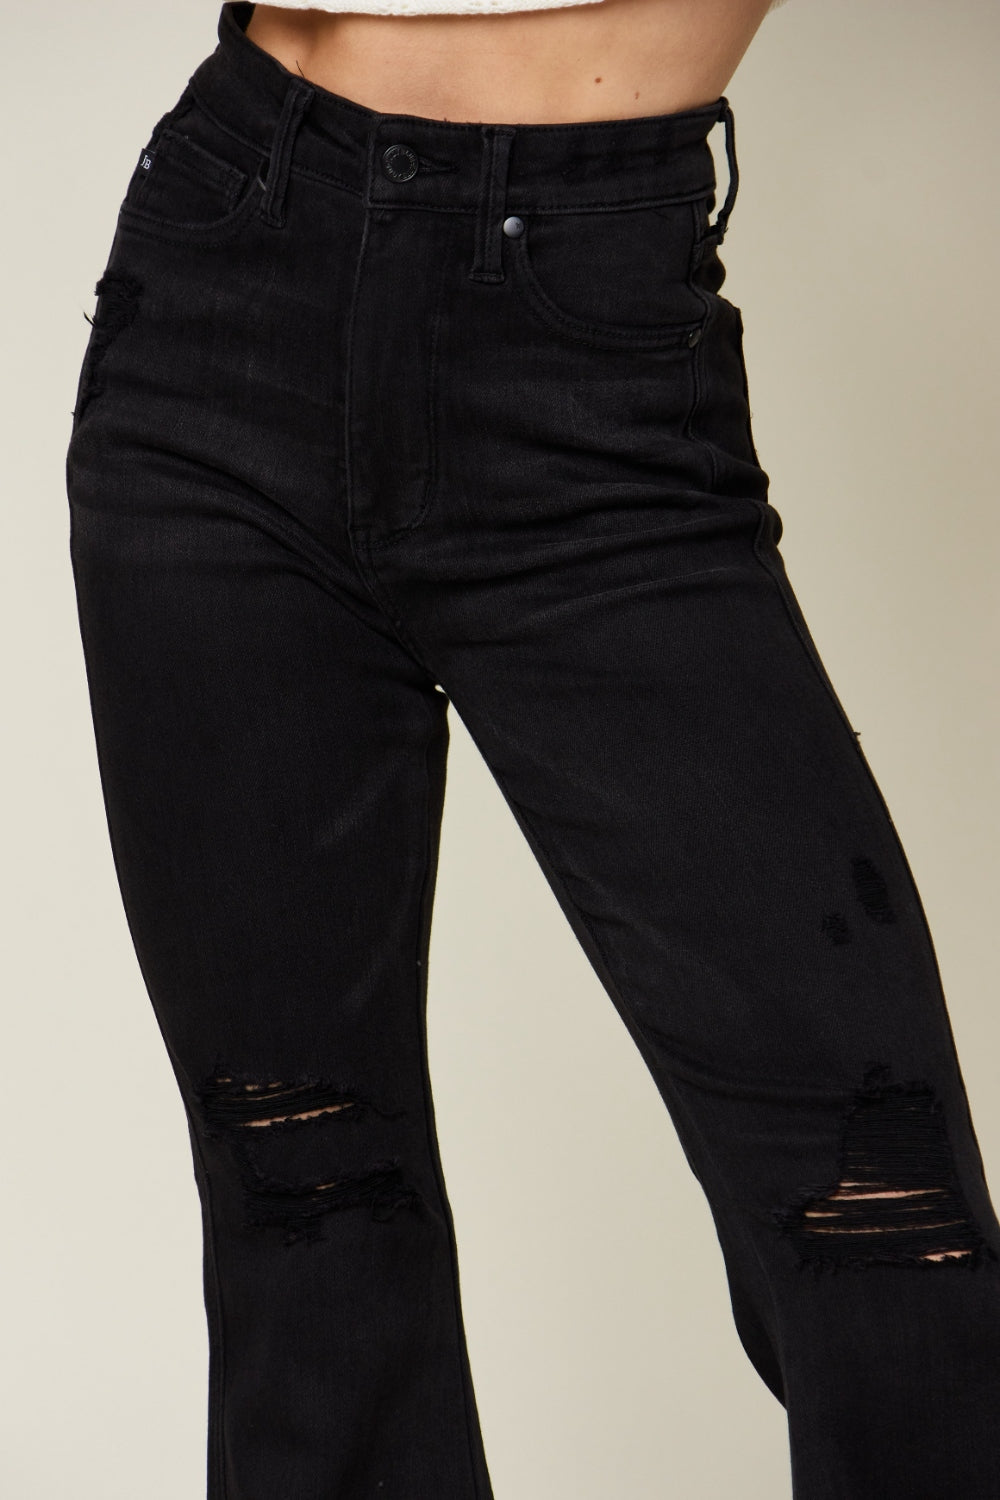 Women's Flare Jeans - Distressed Flare Jeans | Elegant Lioness